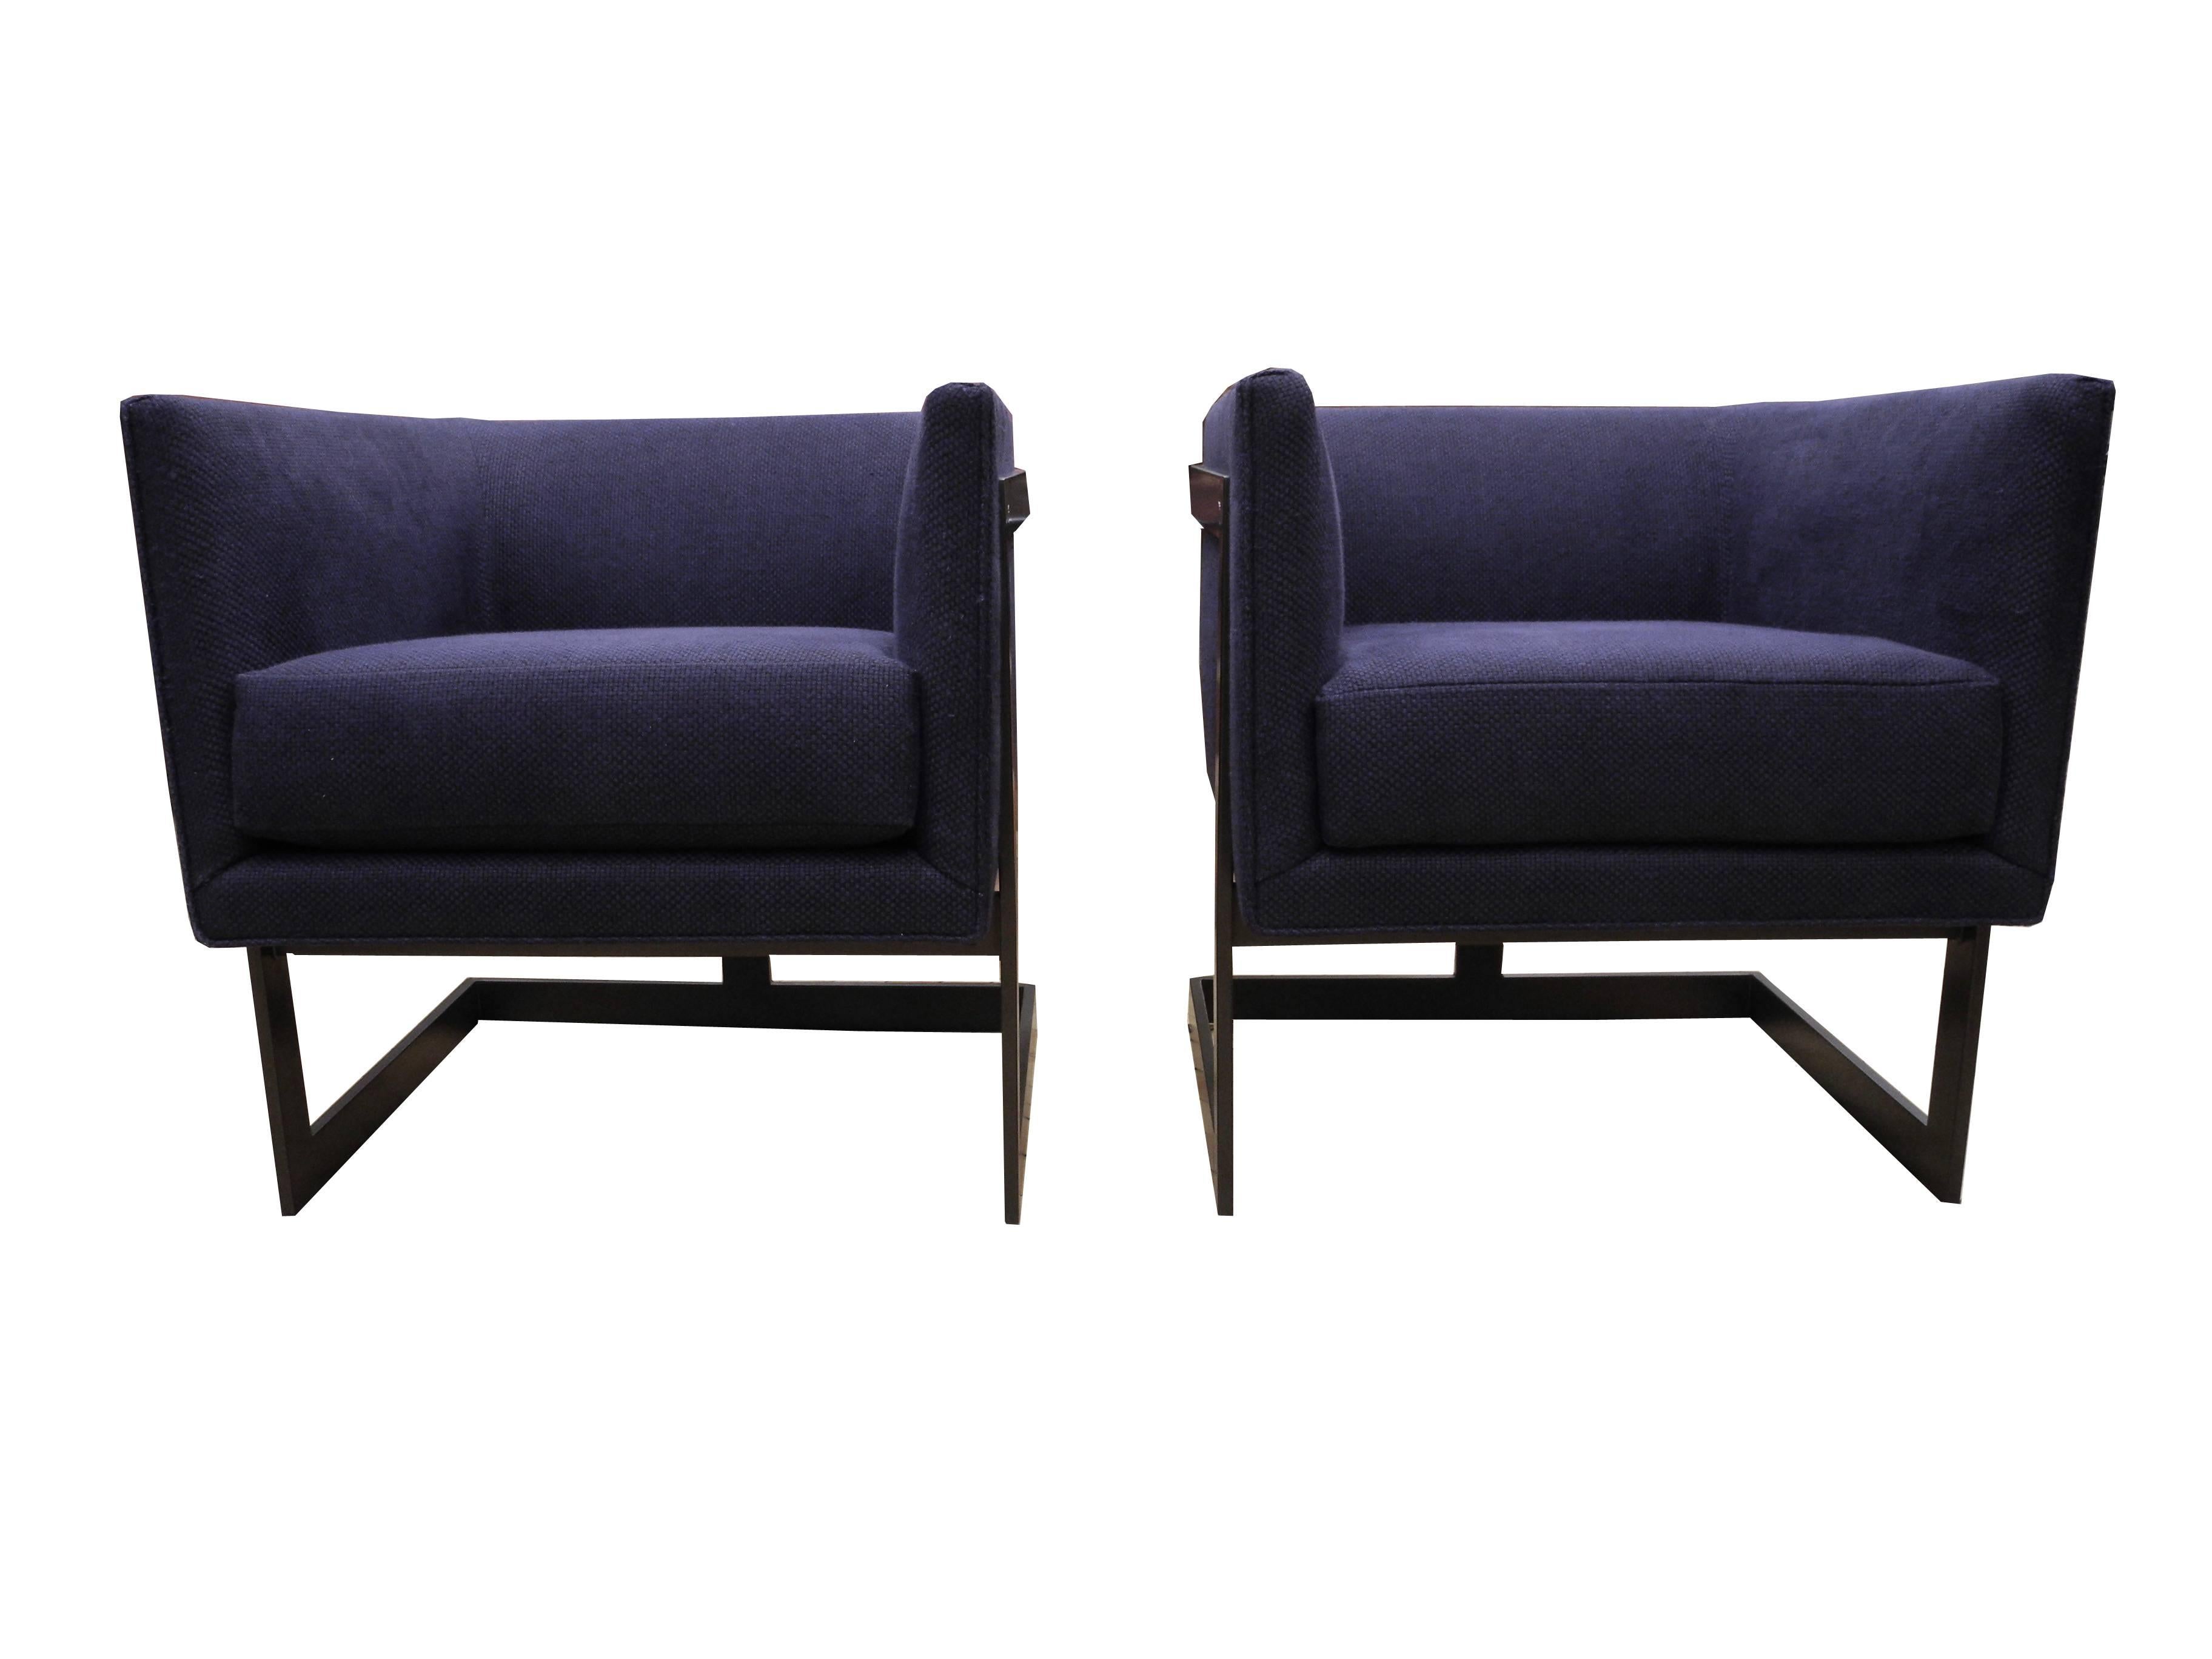 These boxy armchairs have a woven navy blue fabric and a bronze finish frame.